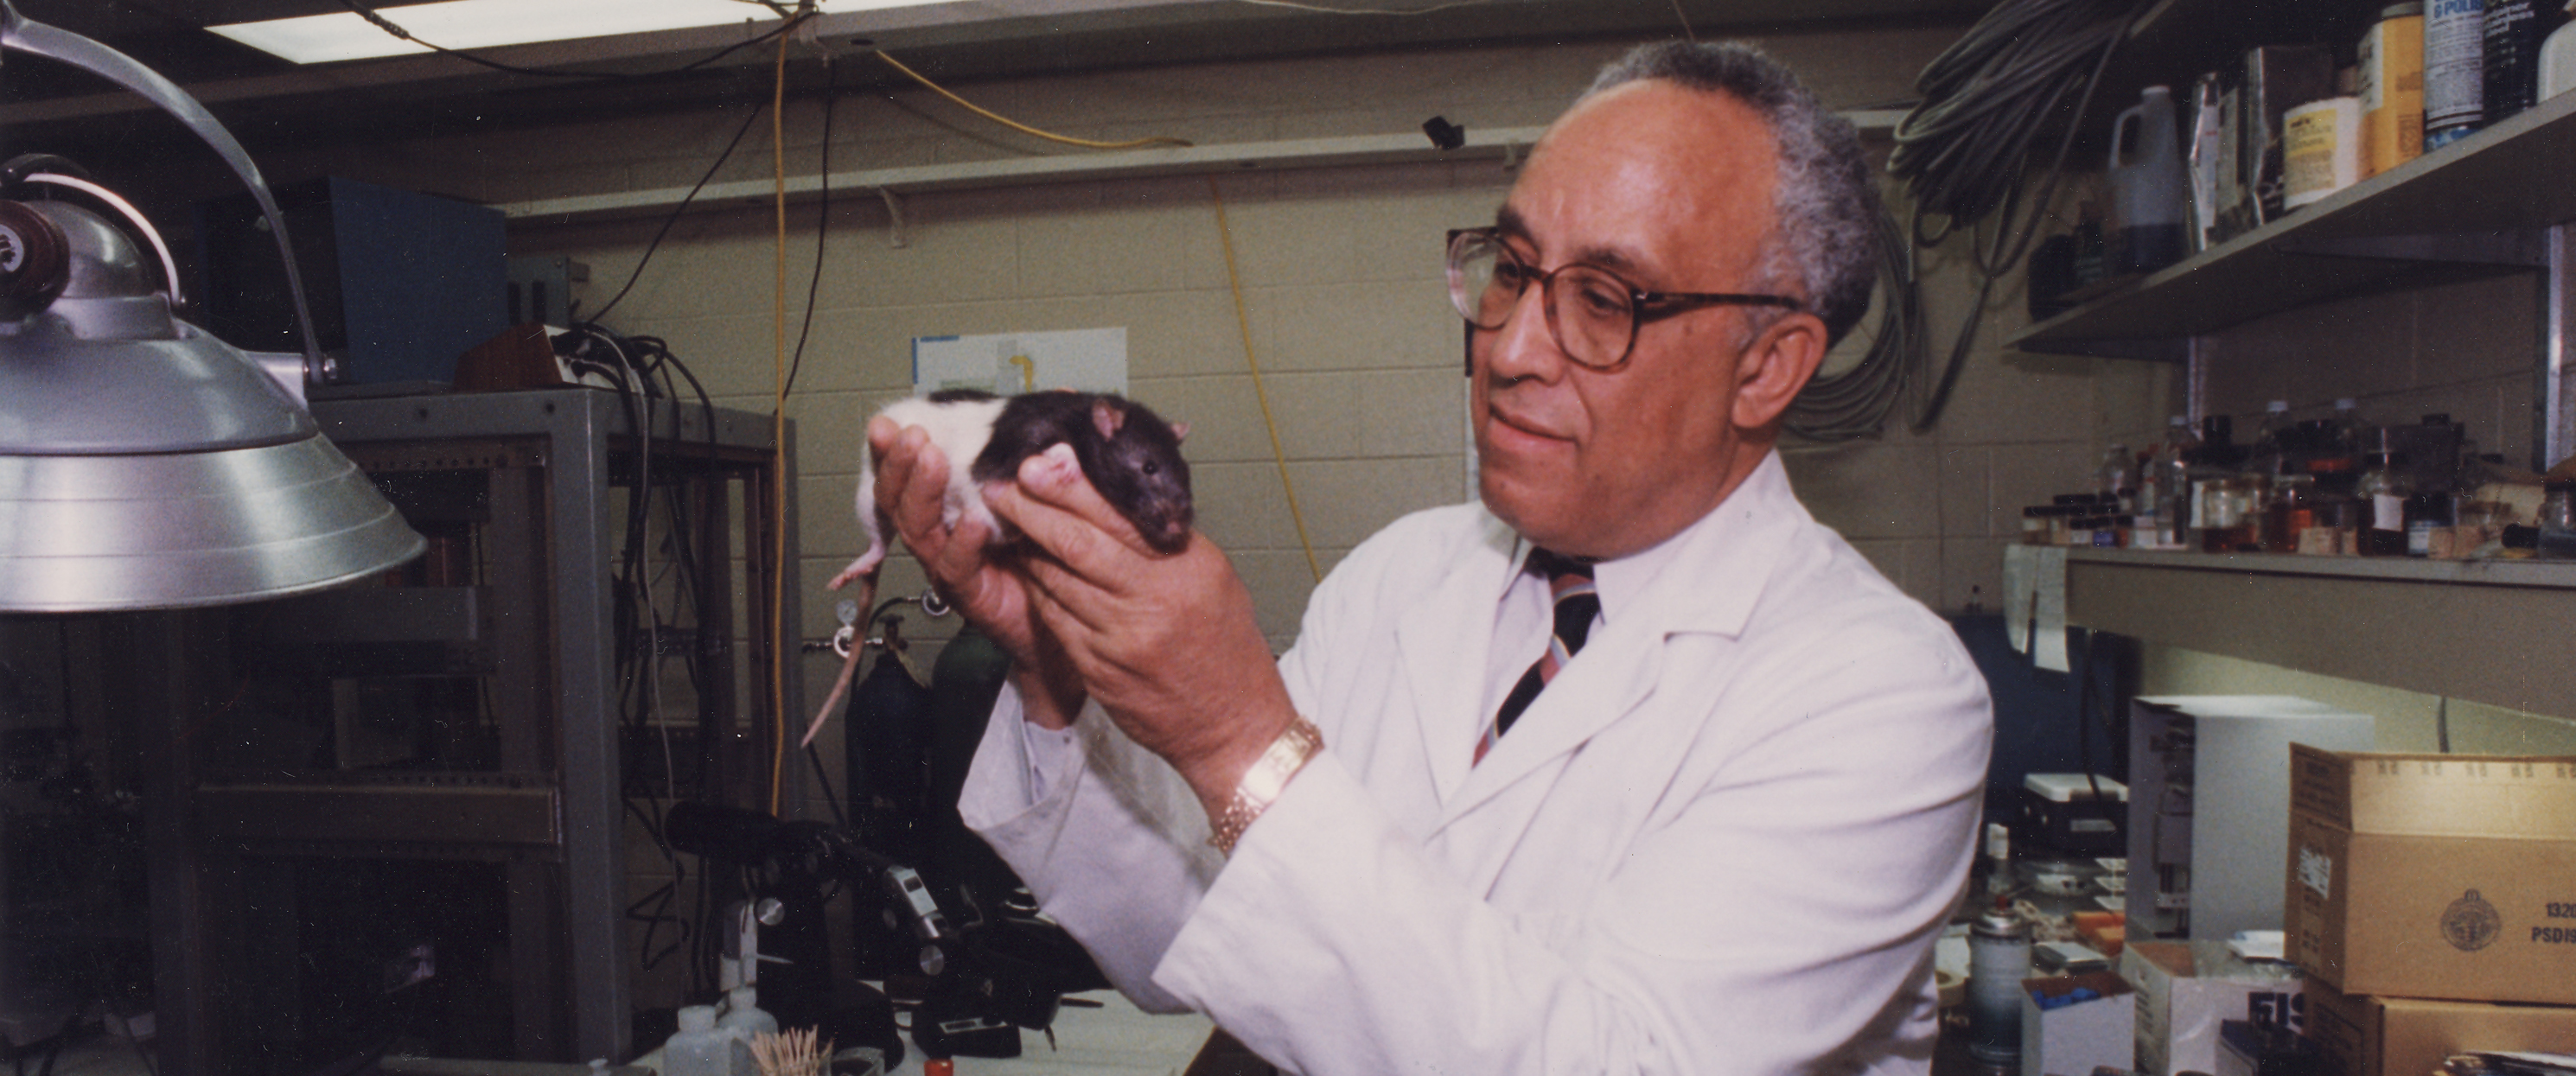 An African American man wearing a lab coat and holding a small white and black rat. He is surrounded by laboratory equipment.